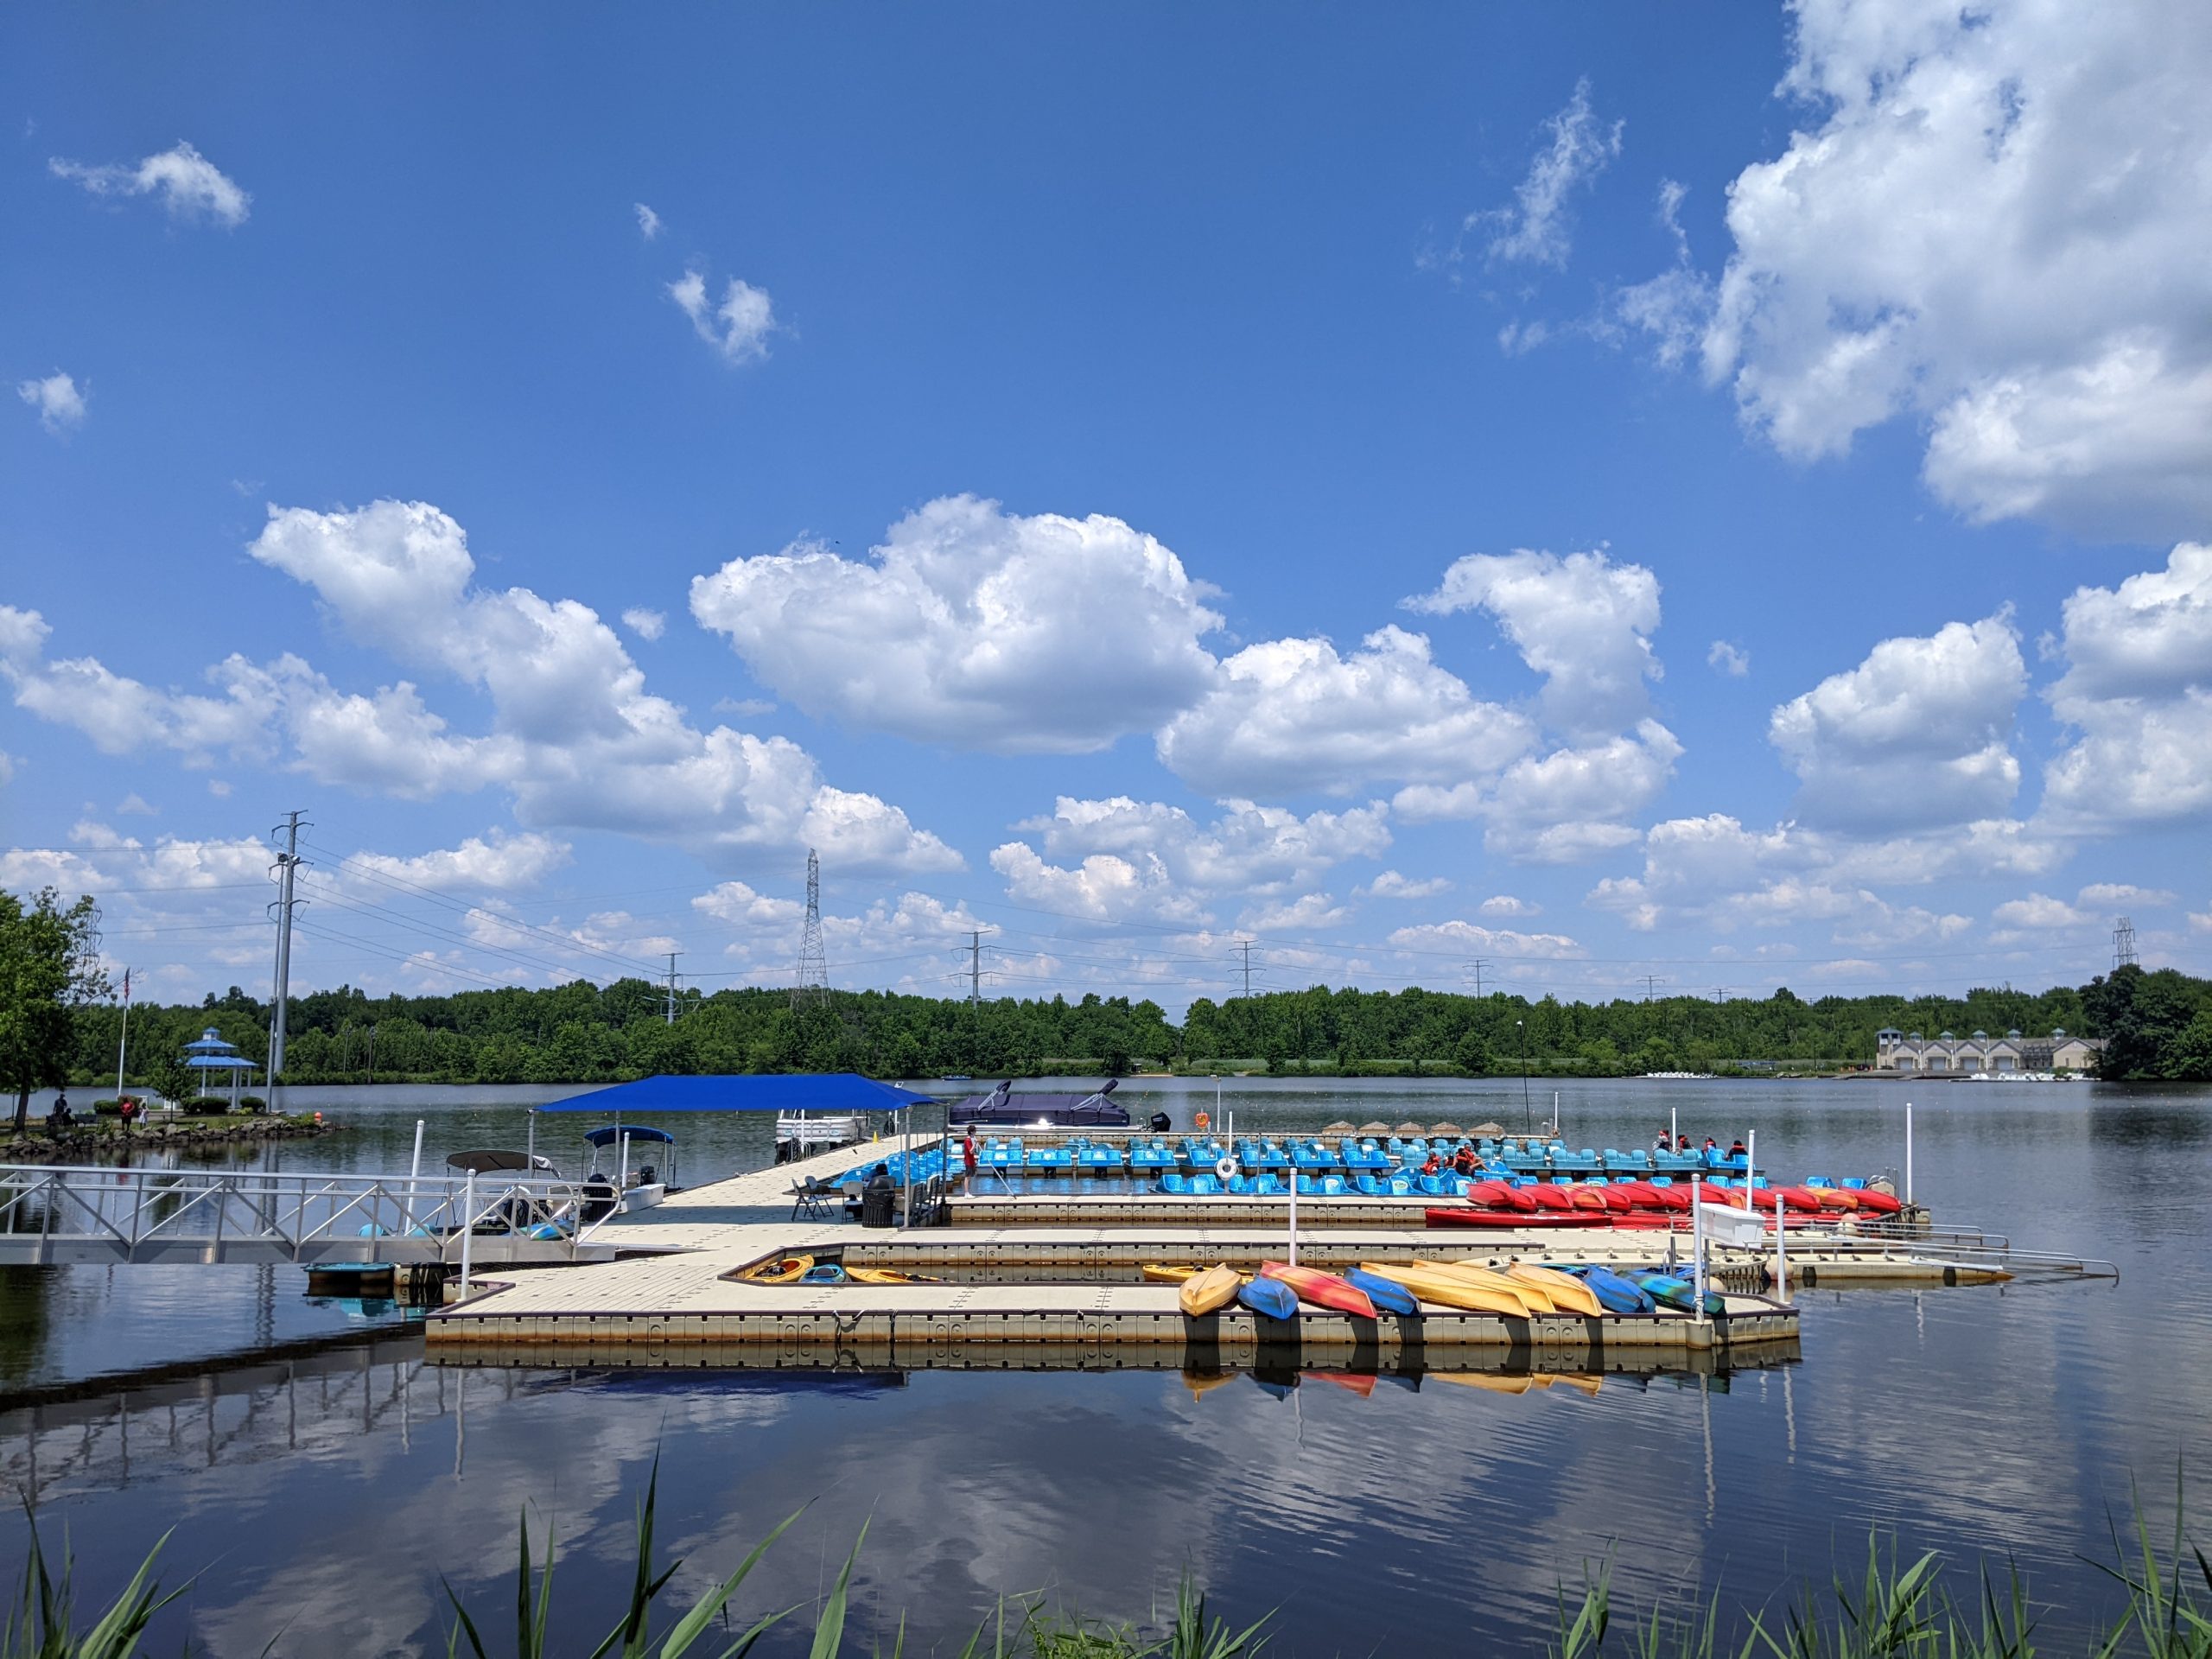 Mercer County Park Playground in West Windsor Township NJ Boat rentals at the Marina